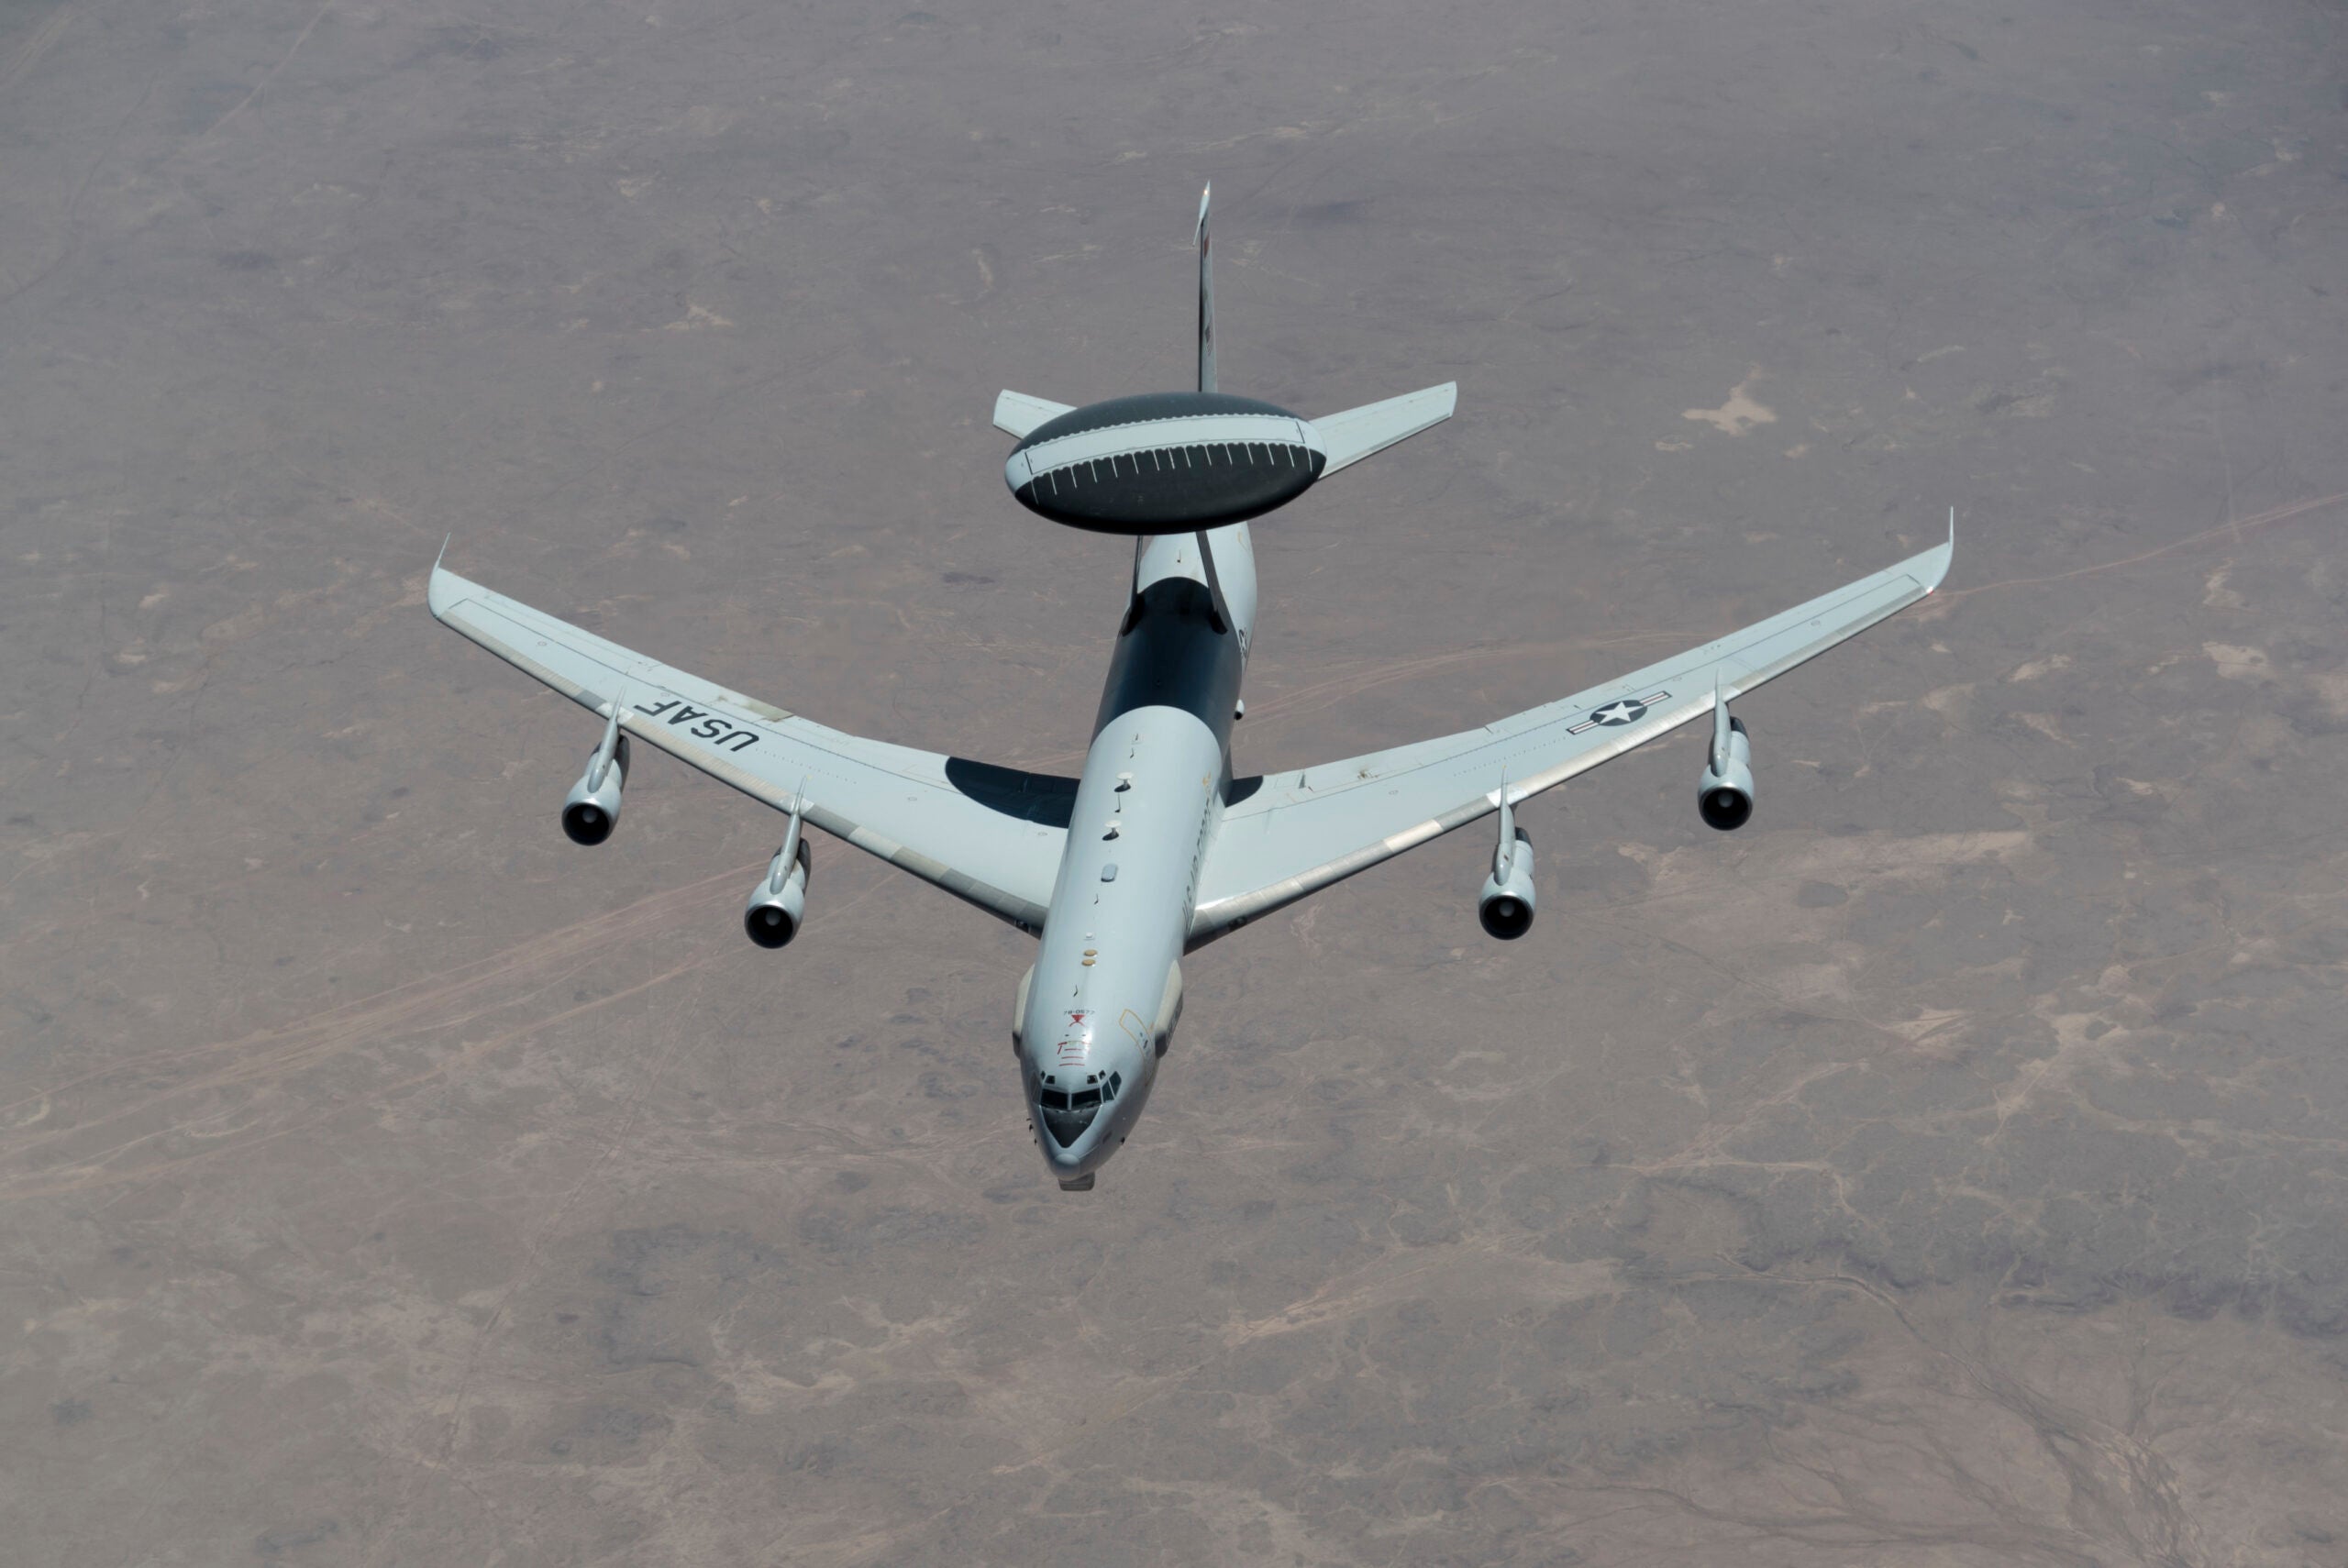 E-3 Airborne Warning and Control System